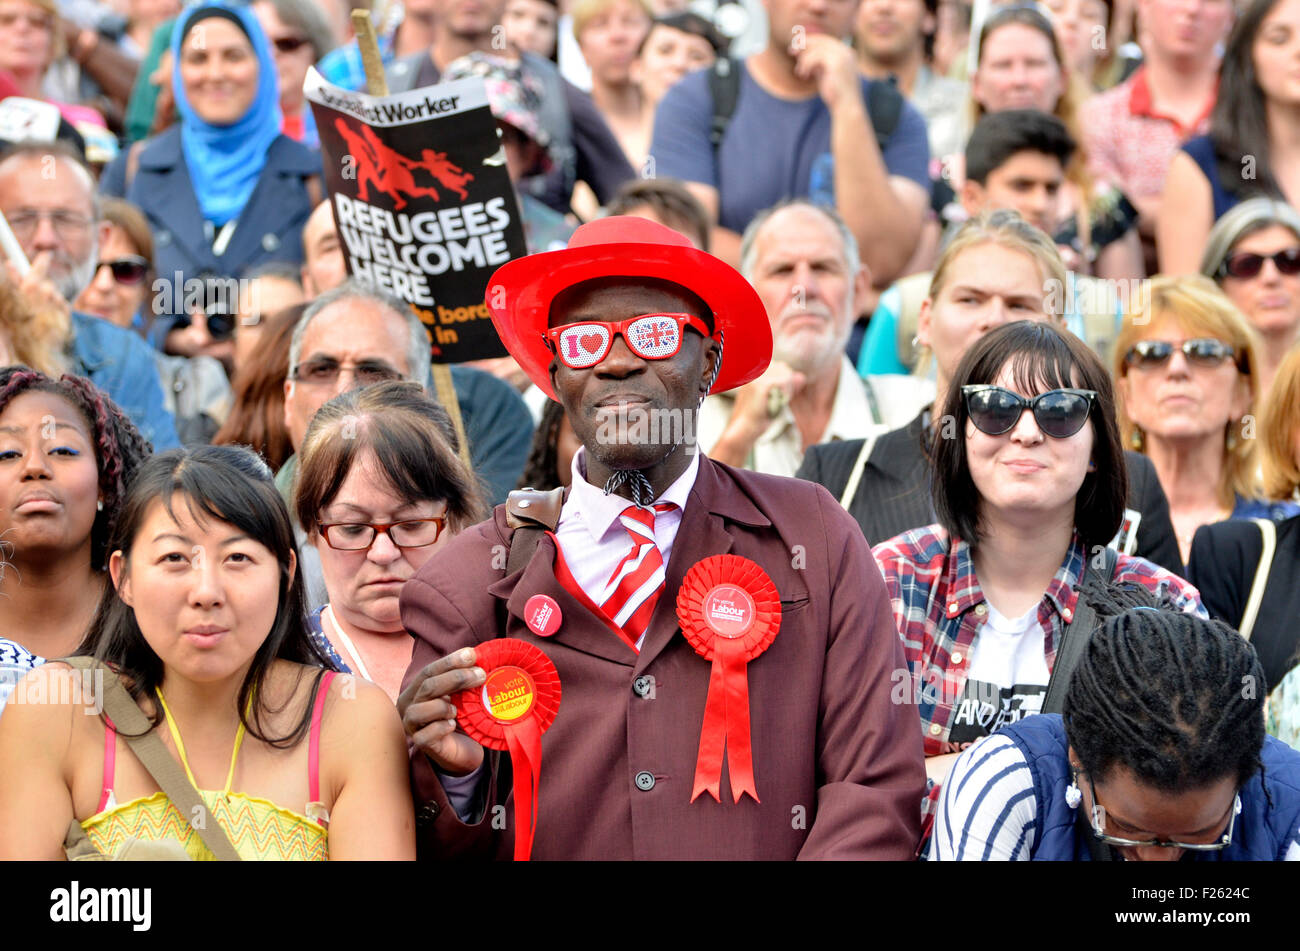 London, 12th Sept. Tens of thousands march in support of refugees, from Marble Arch to parliament Square, where they are addressed by speakers including the new labour leader, Jeremy Corbyn. Credit:  PjrNews/Alamy Live News Stock Photo